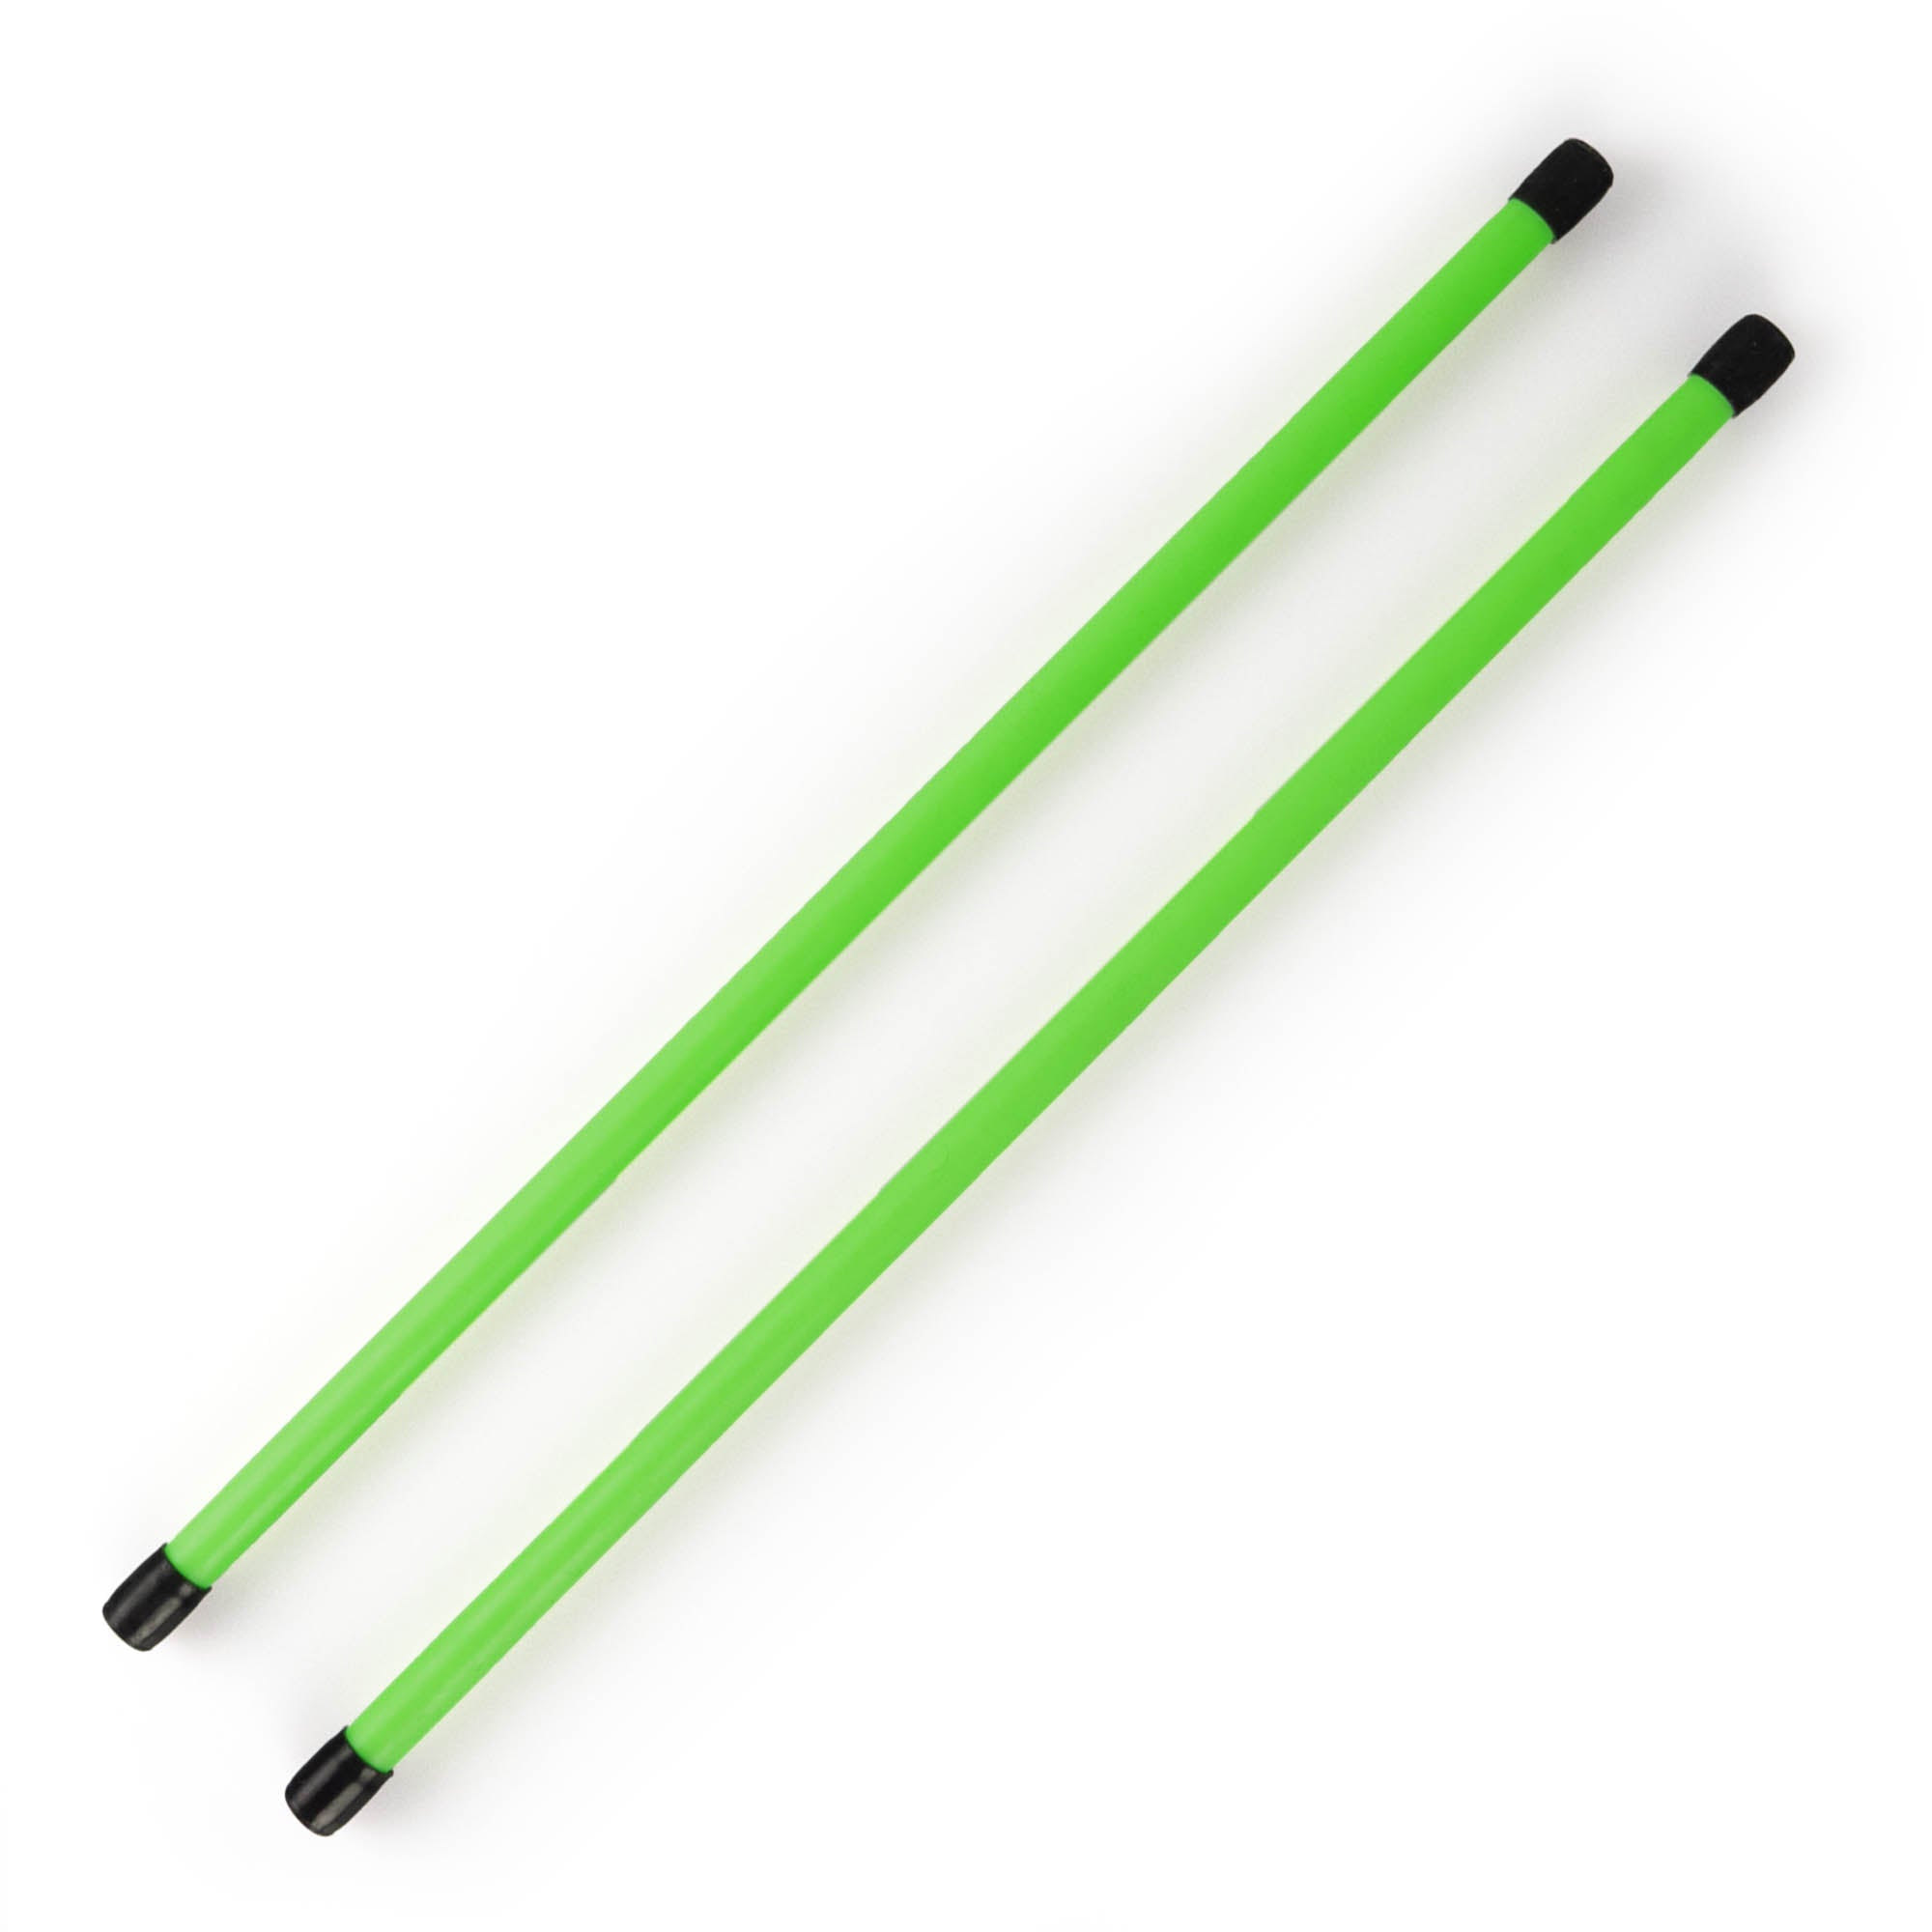 A pair of green devilstick handsticks with black caps on each end